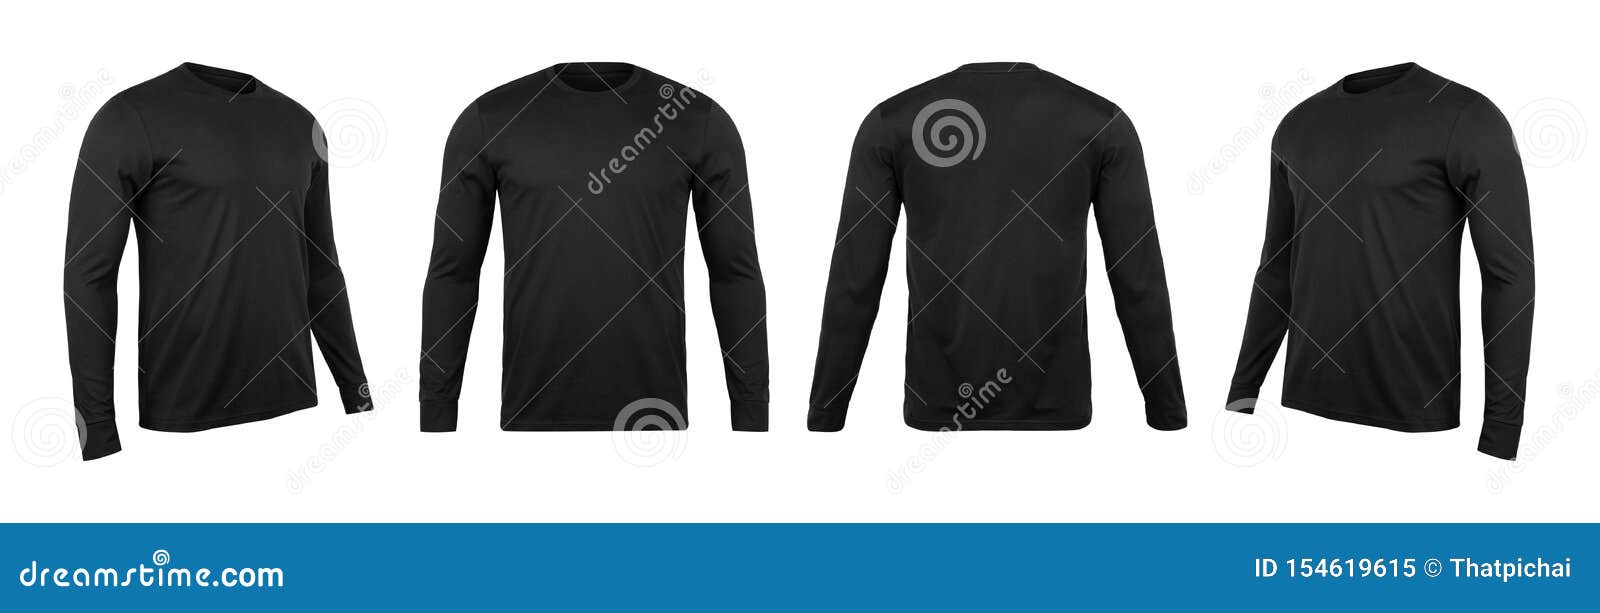 Download Blank Black Long Sleve T-shirt Mock Up Template, Front And ...